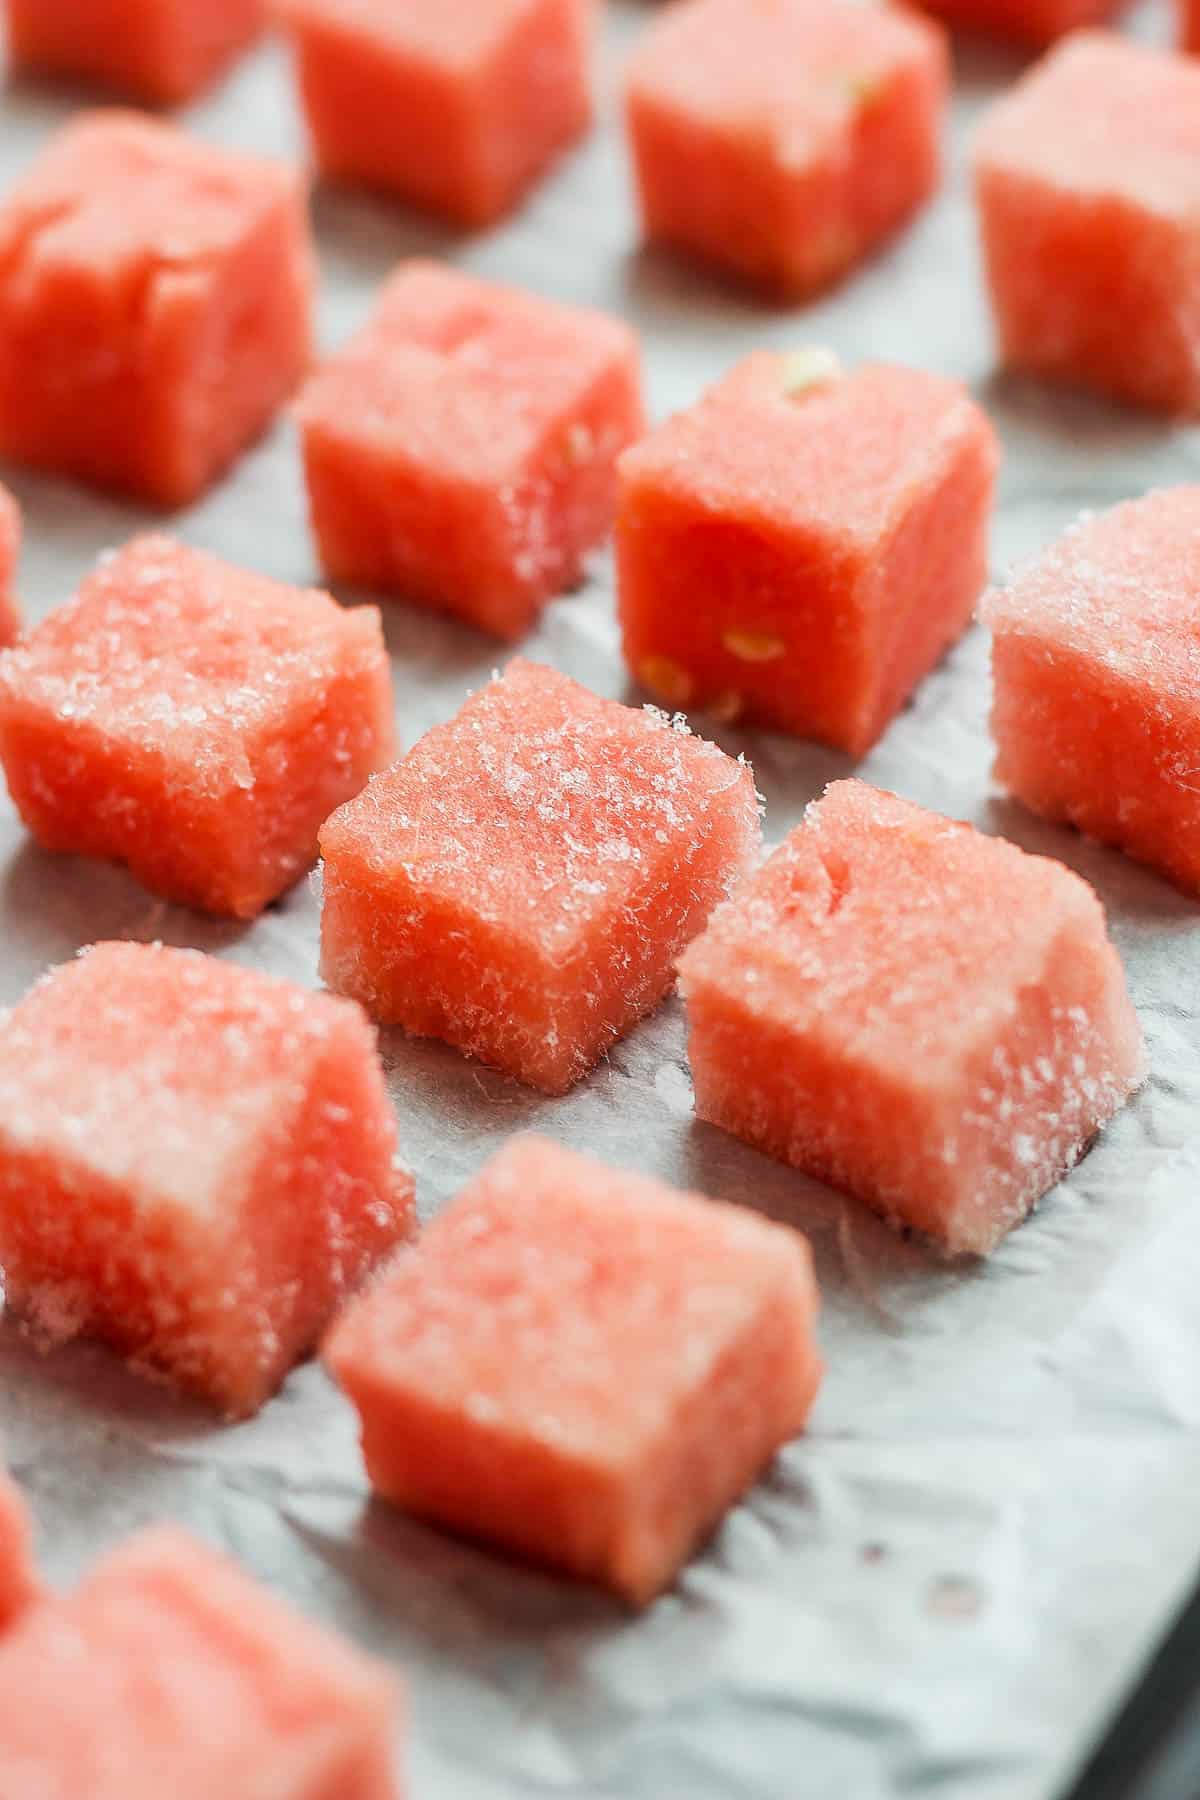 A tutorial on how to easily freeze fresh watermelon.